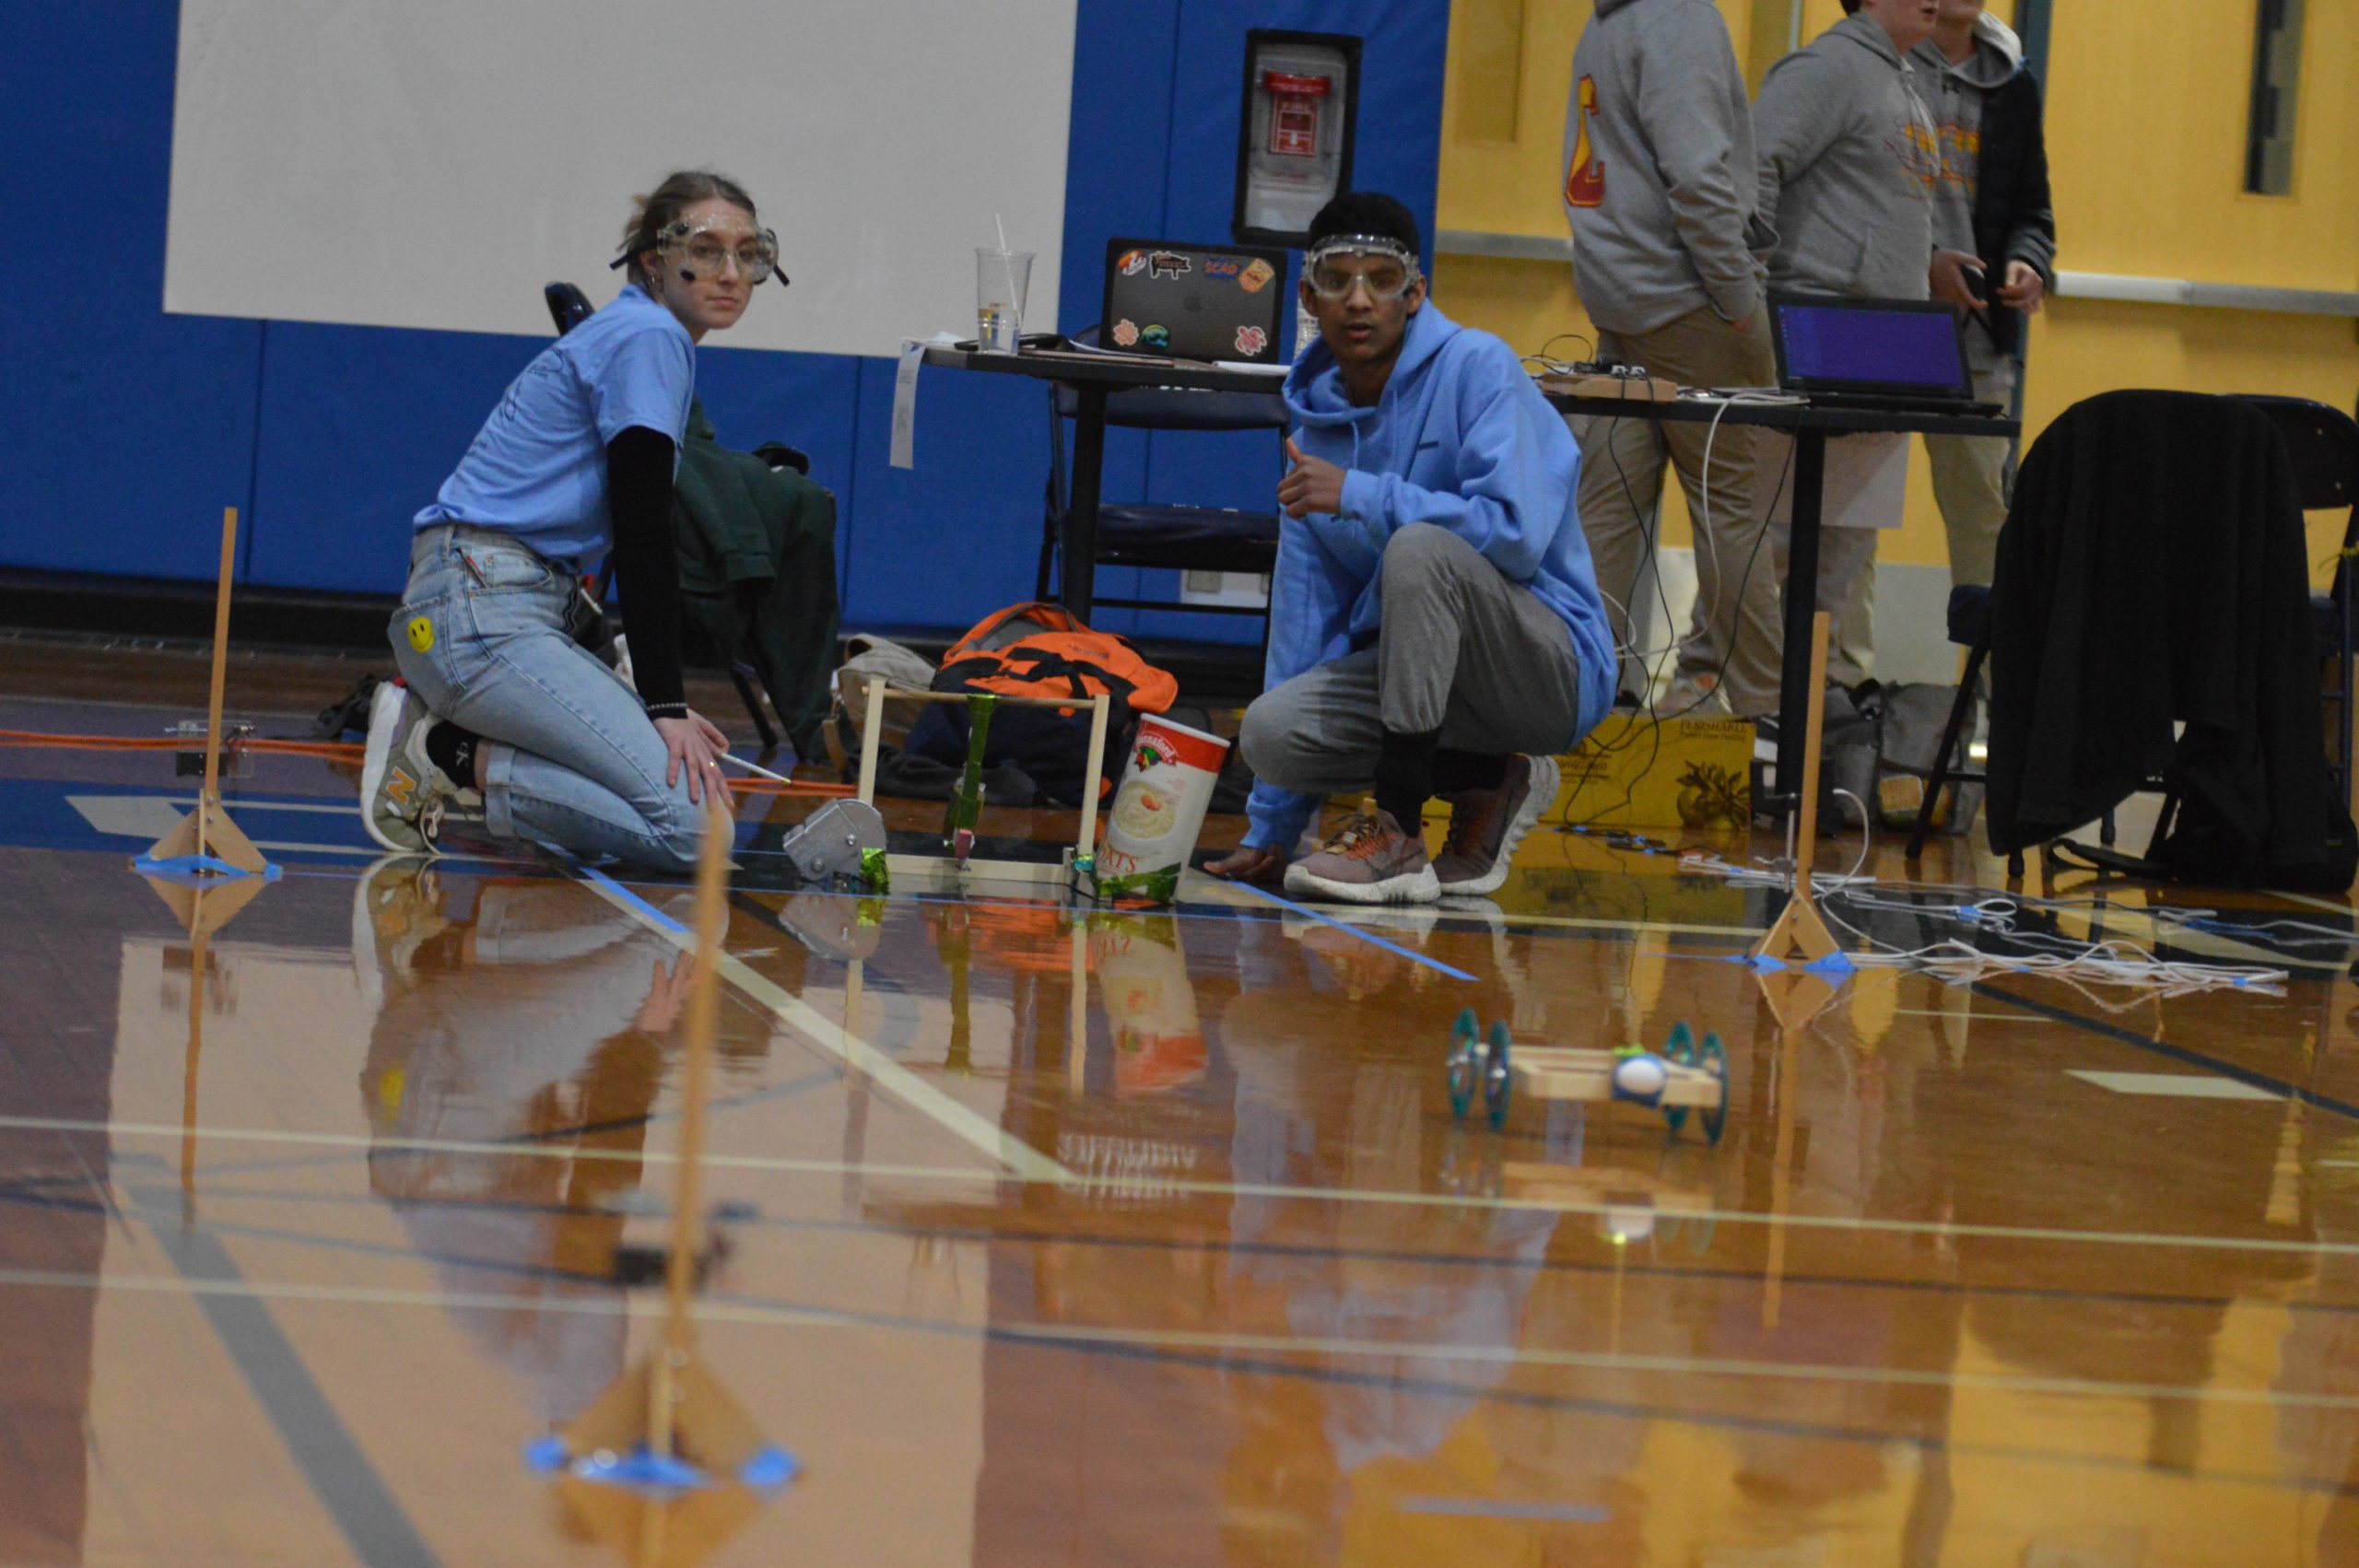 Students competing in the Scrambler event at the Capital Region Science Olympiad Invitational.